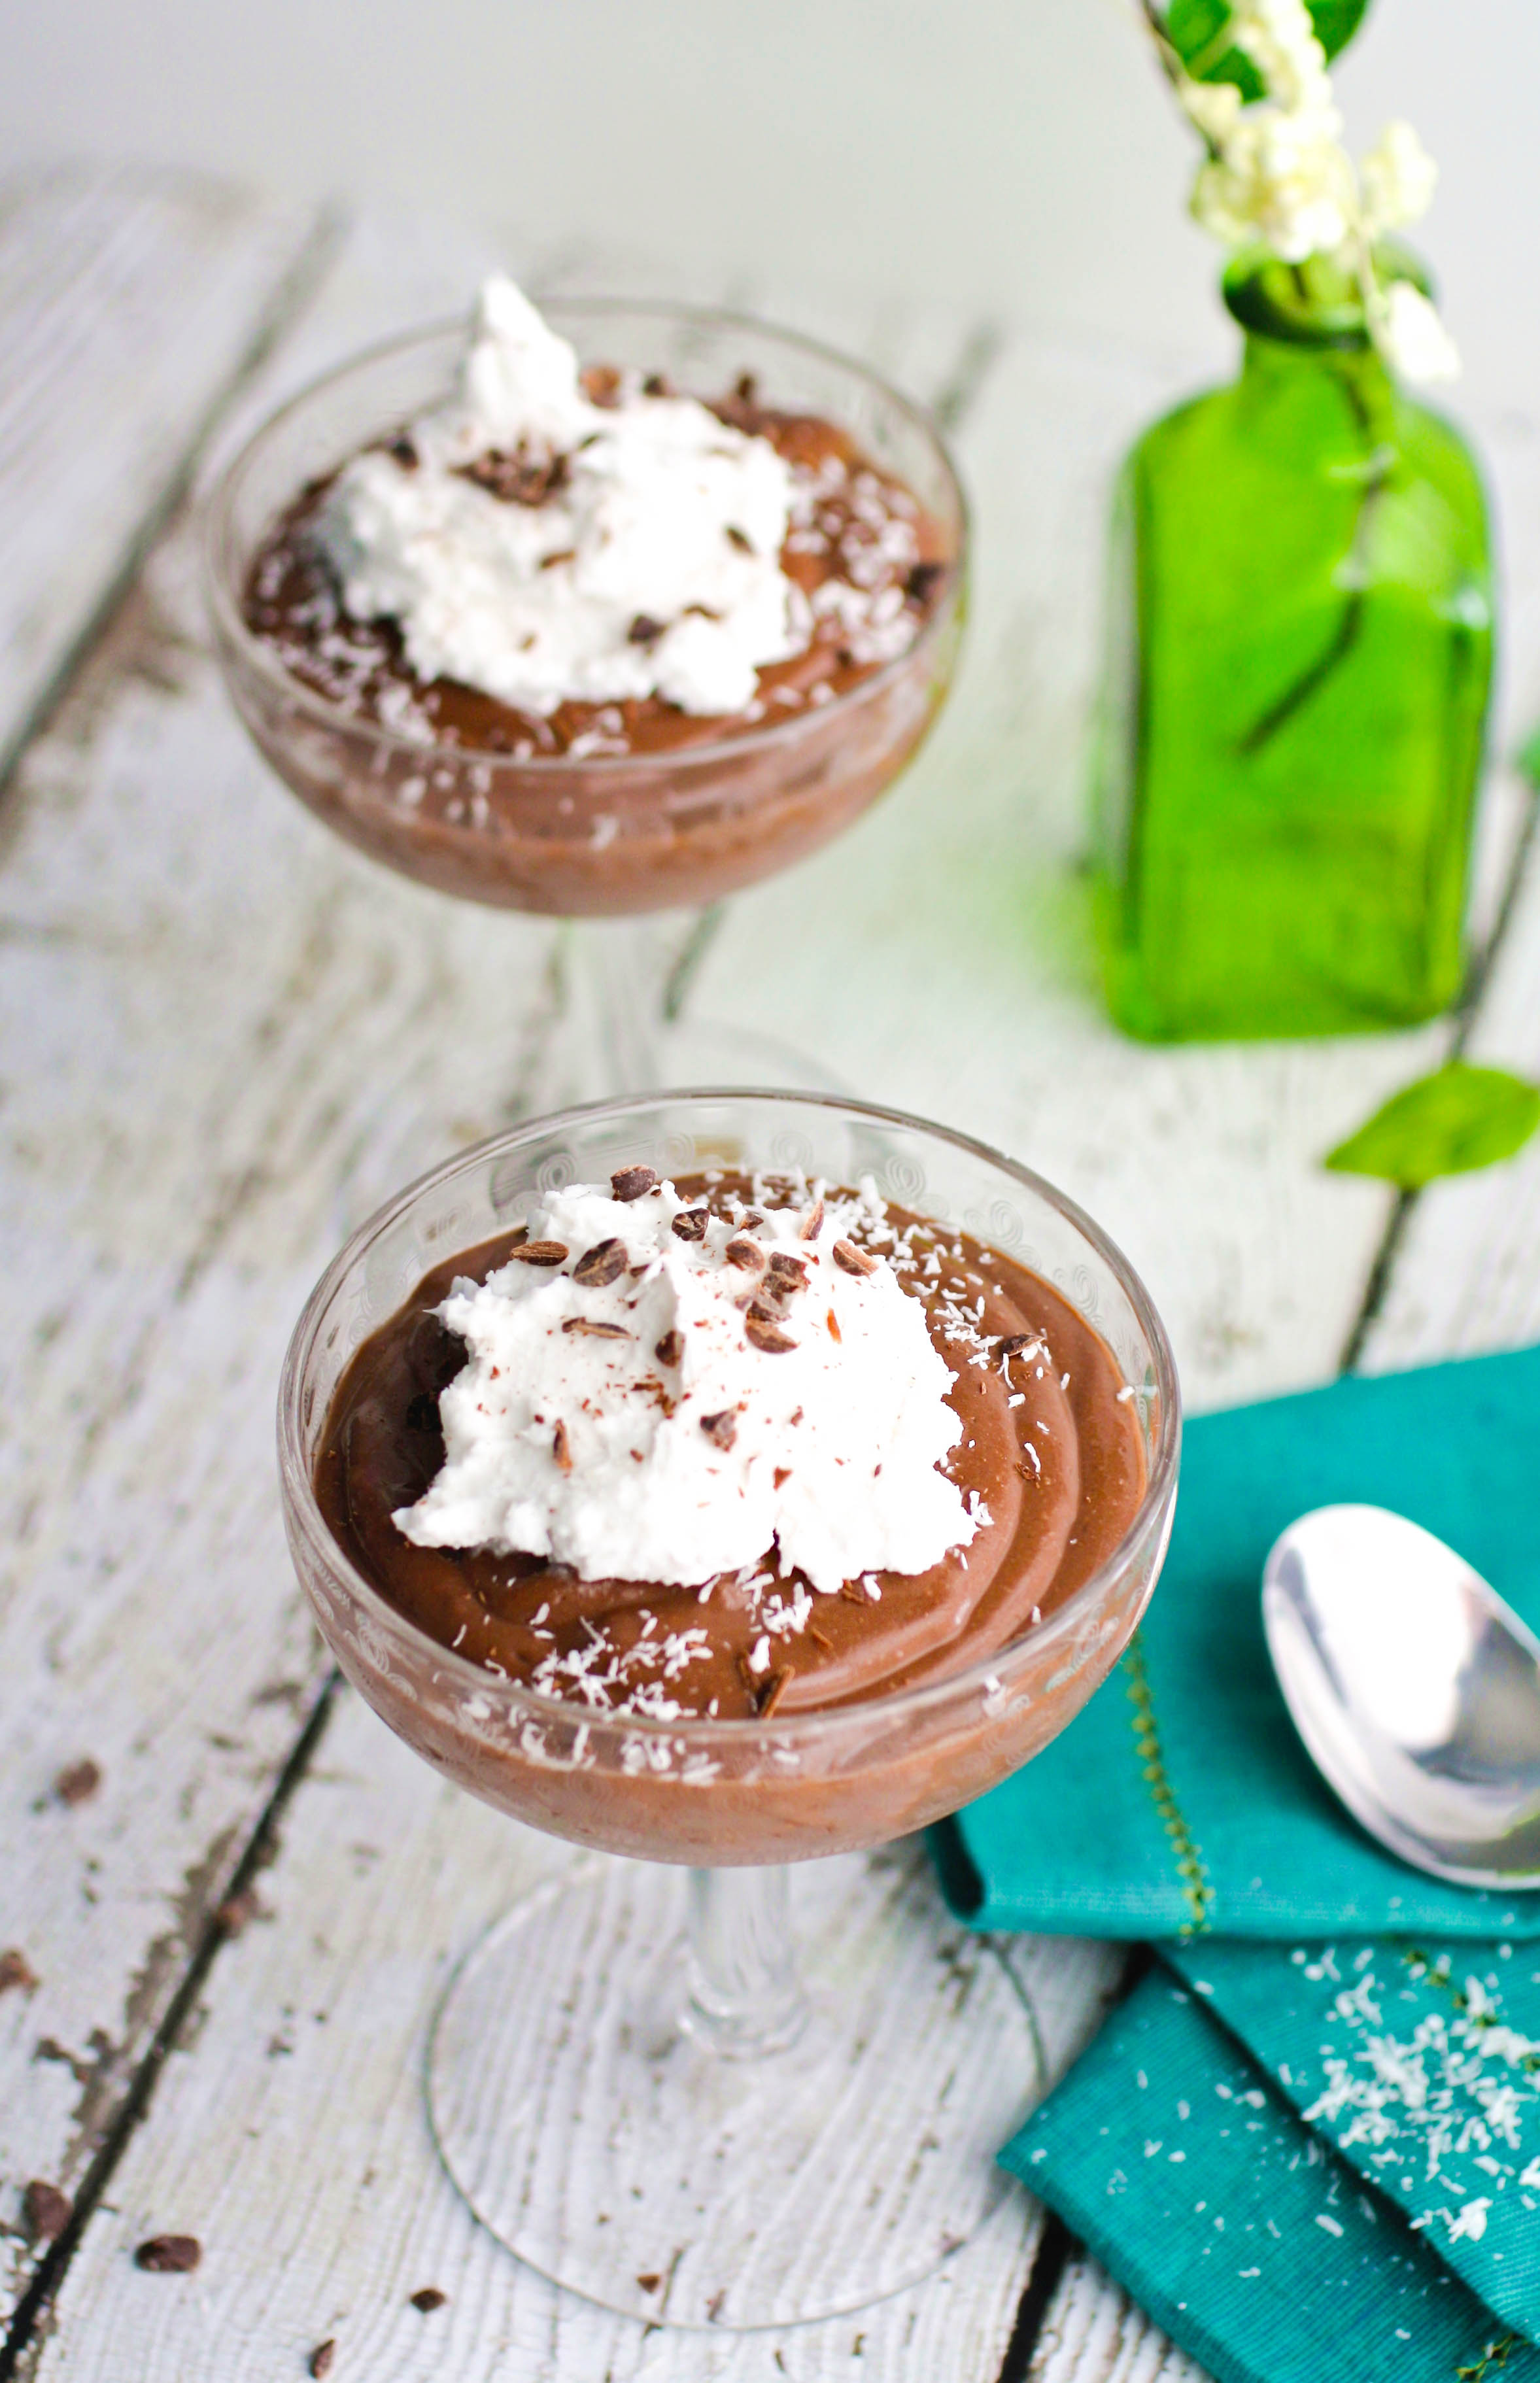 Vegan Chocolate-Almond Mousse with Coconut Whipped Topping is a treat every chocolate lover will enjoy! This vegan chocolate mousse is so dreamy and tasty!